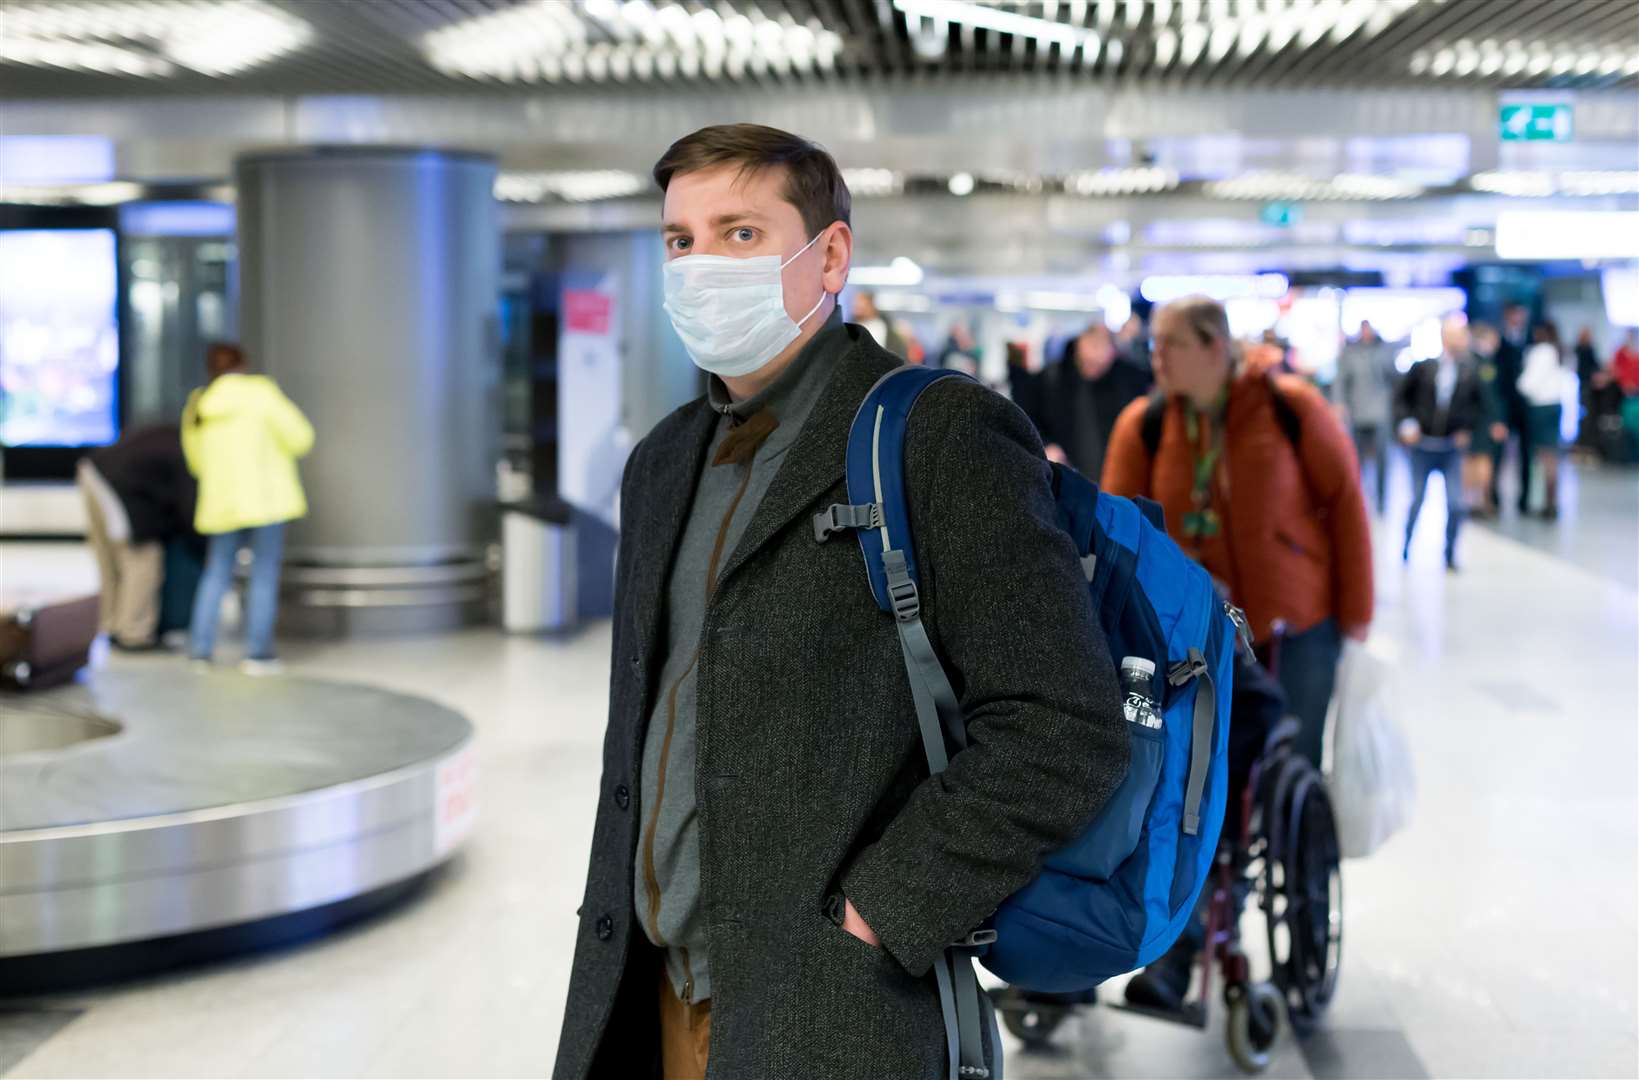 Coronavirus and lockdowns at the start of the year mean that many travellers are only now learning more about post-Brexit travel rules